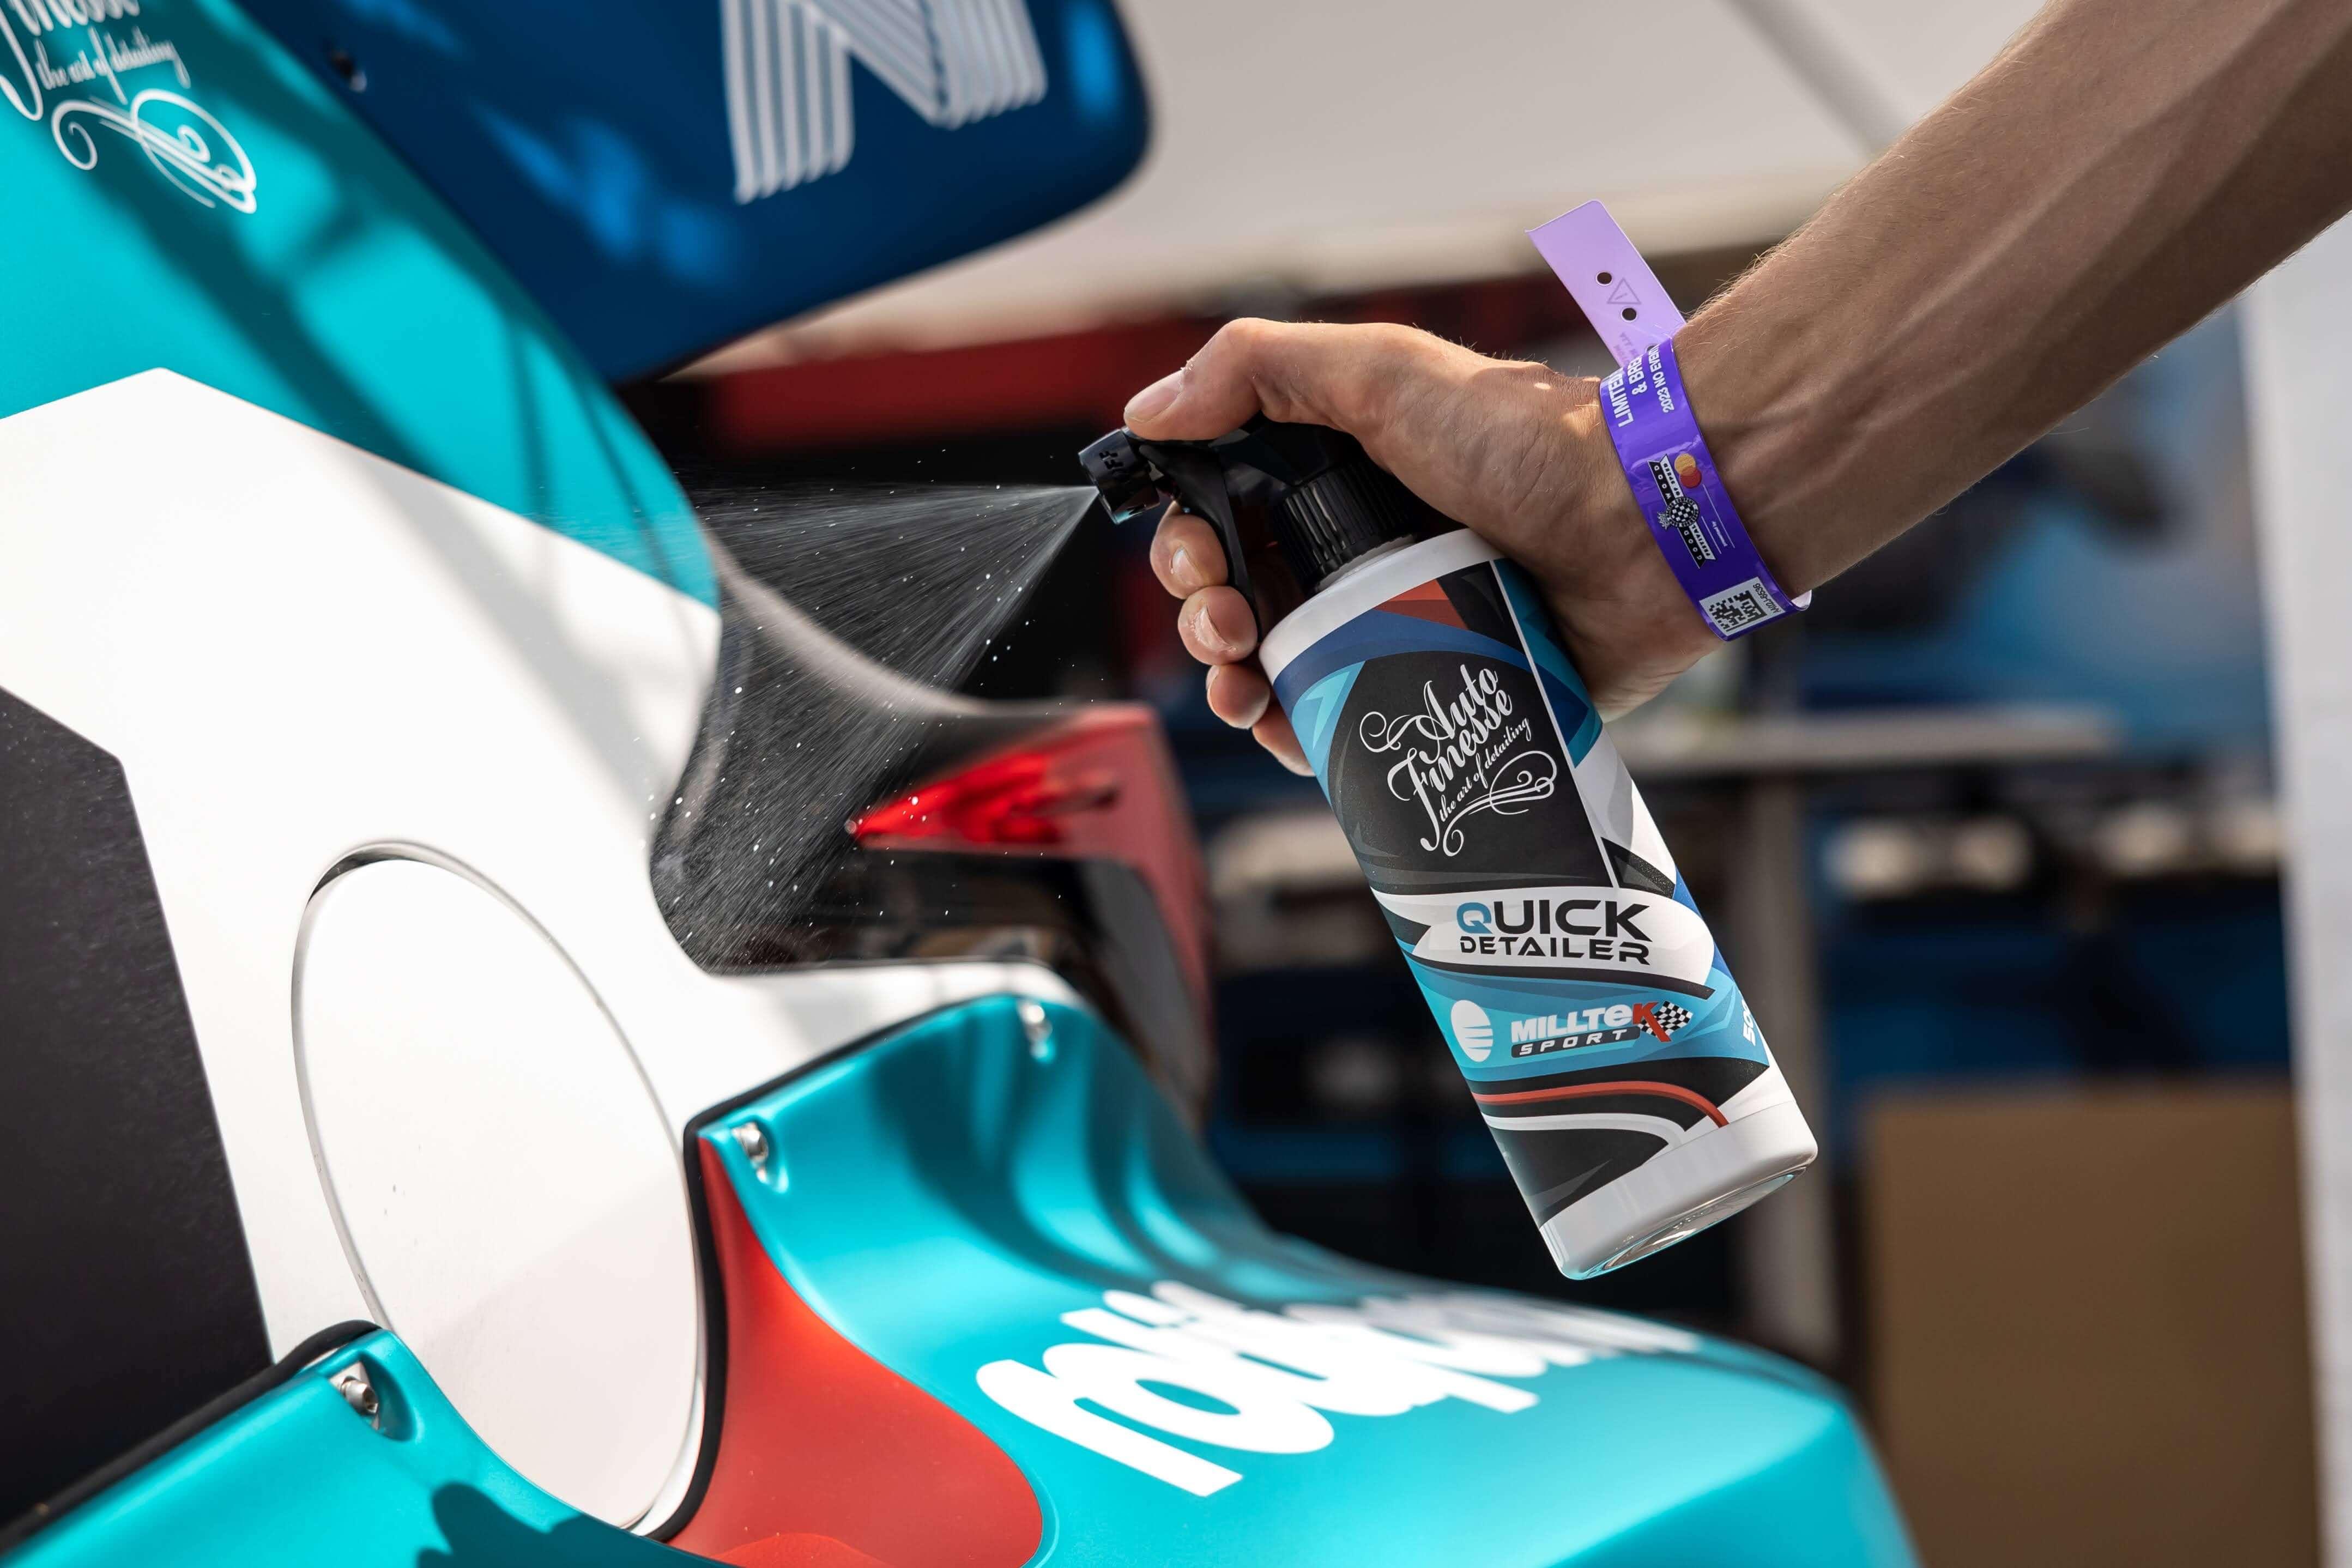 Goodwood Festival of Speed: Get Your Free Quick Detailer